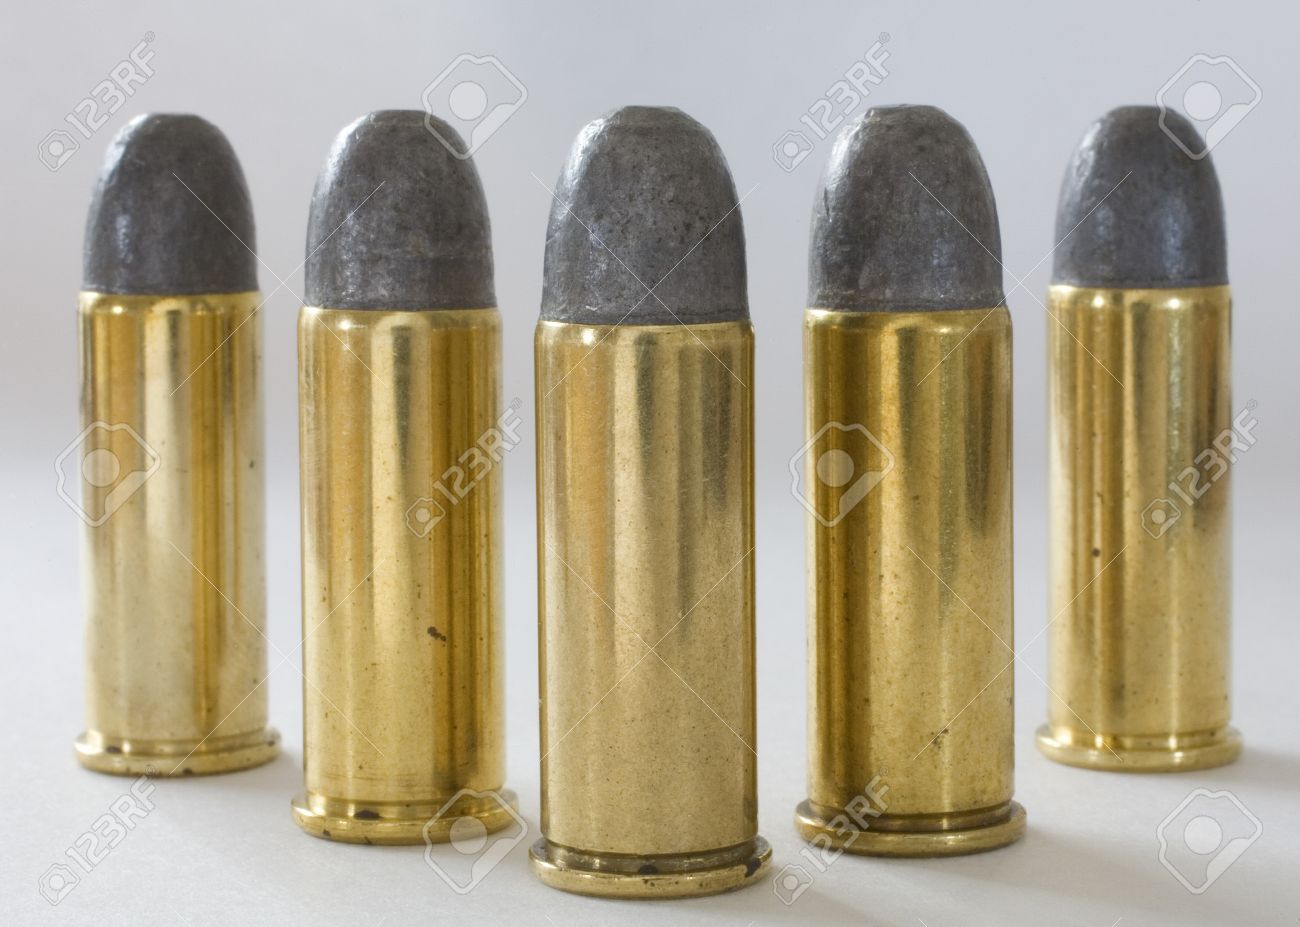 12632330-five-cartridges-with-lead-bullets-made-for-44-special-guns.jpg